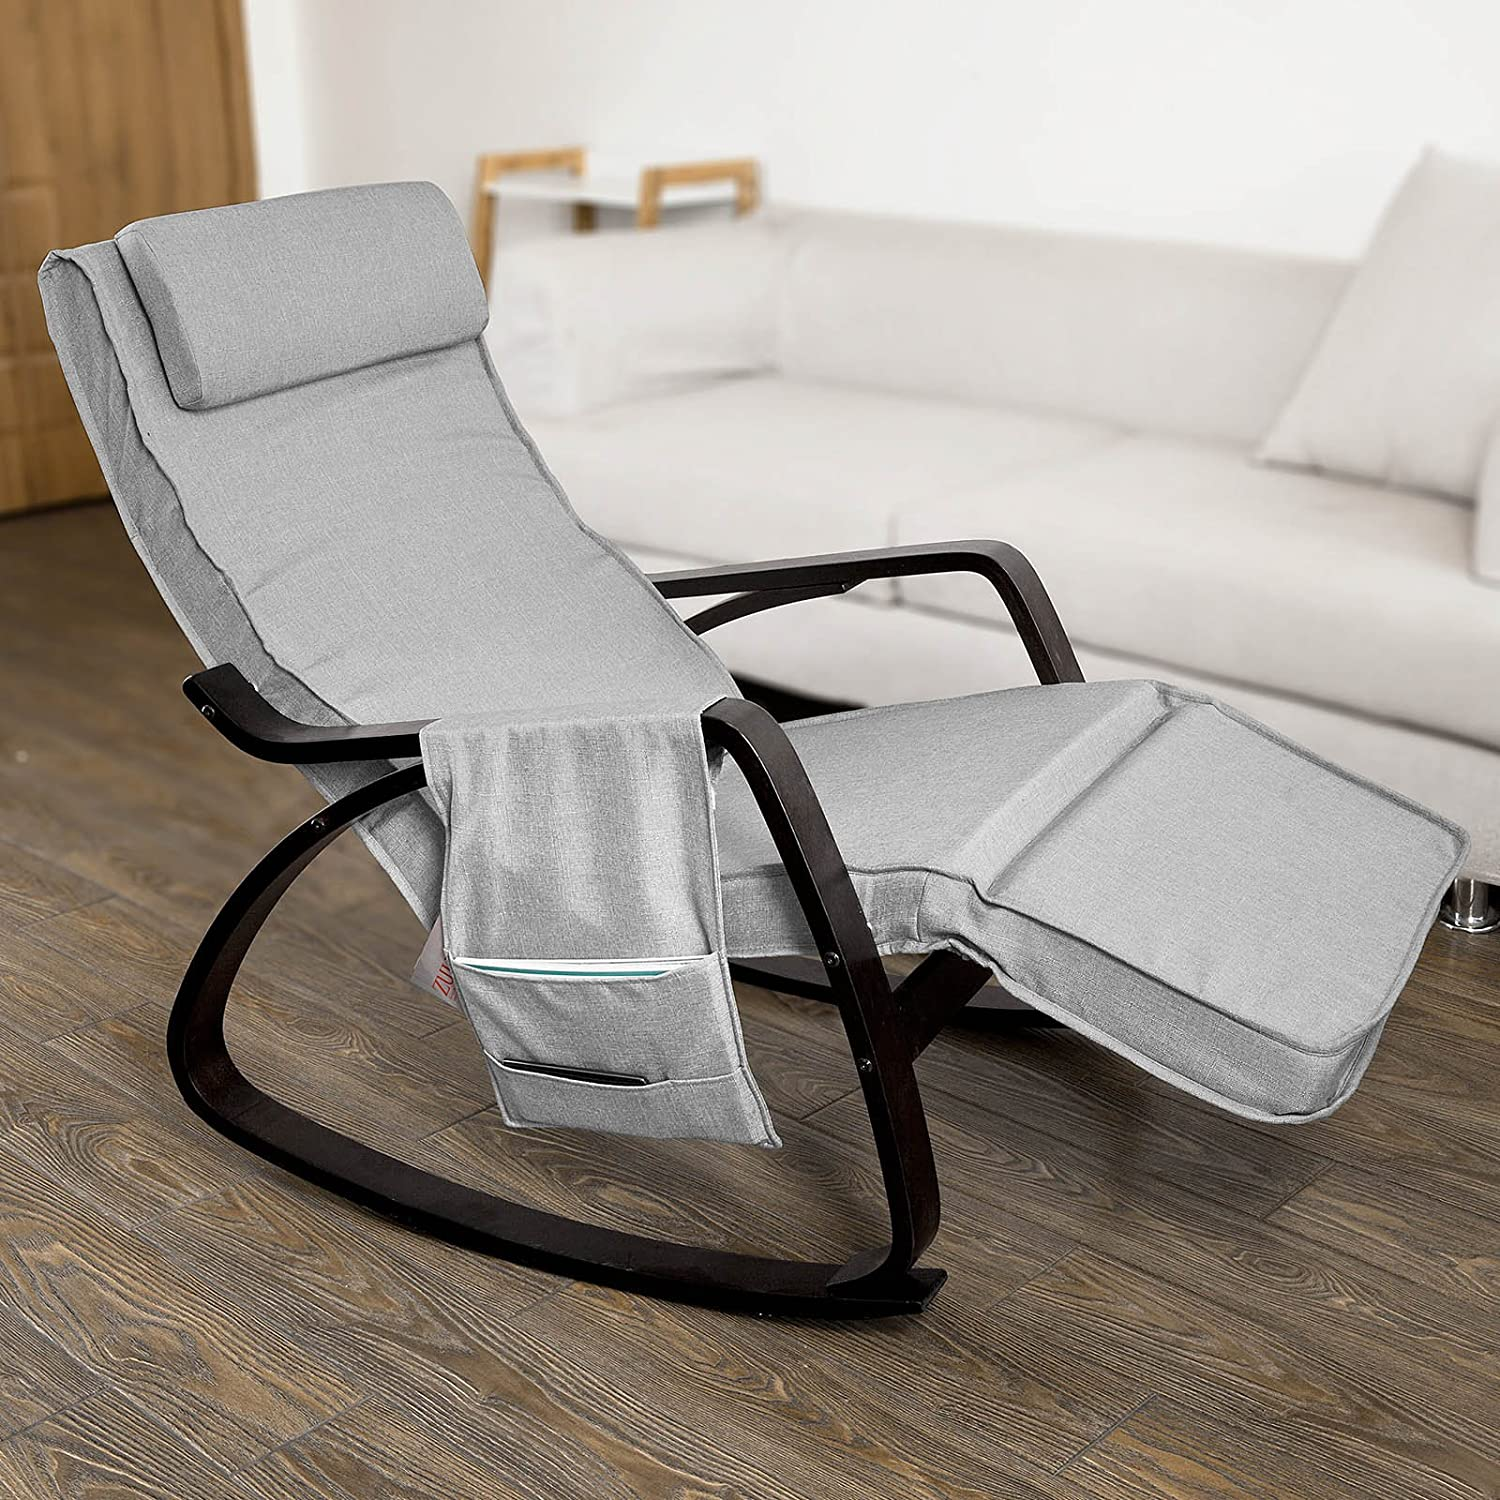 Chaise de grossesse inclinable